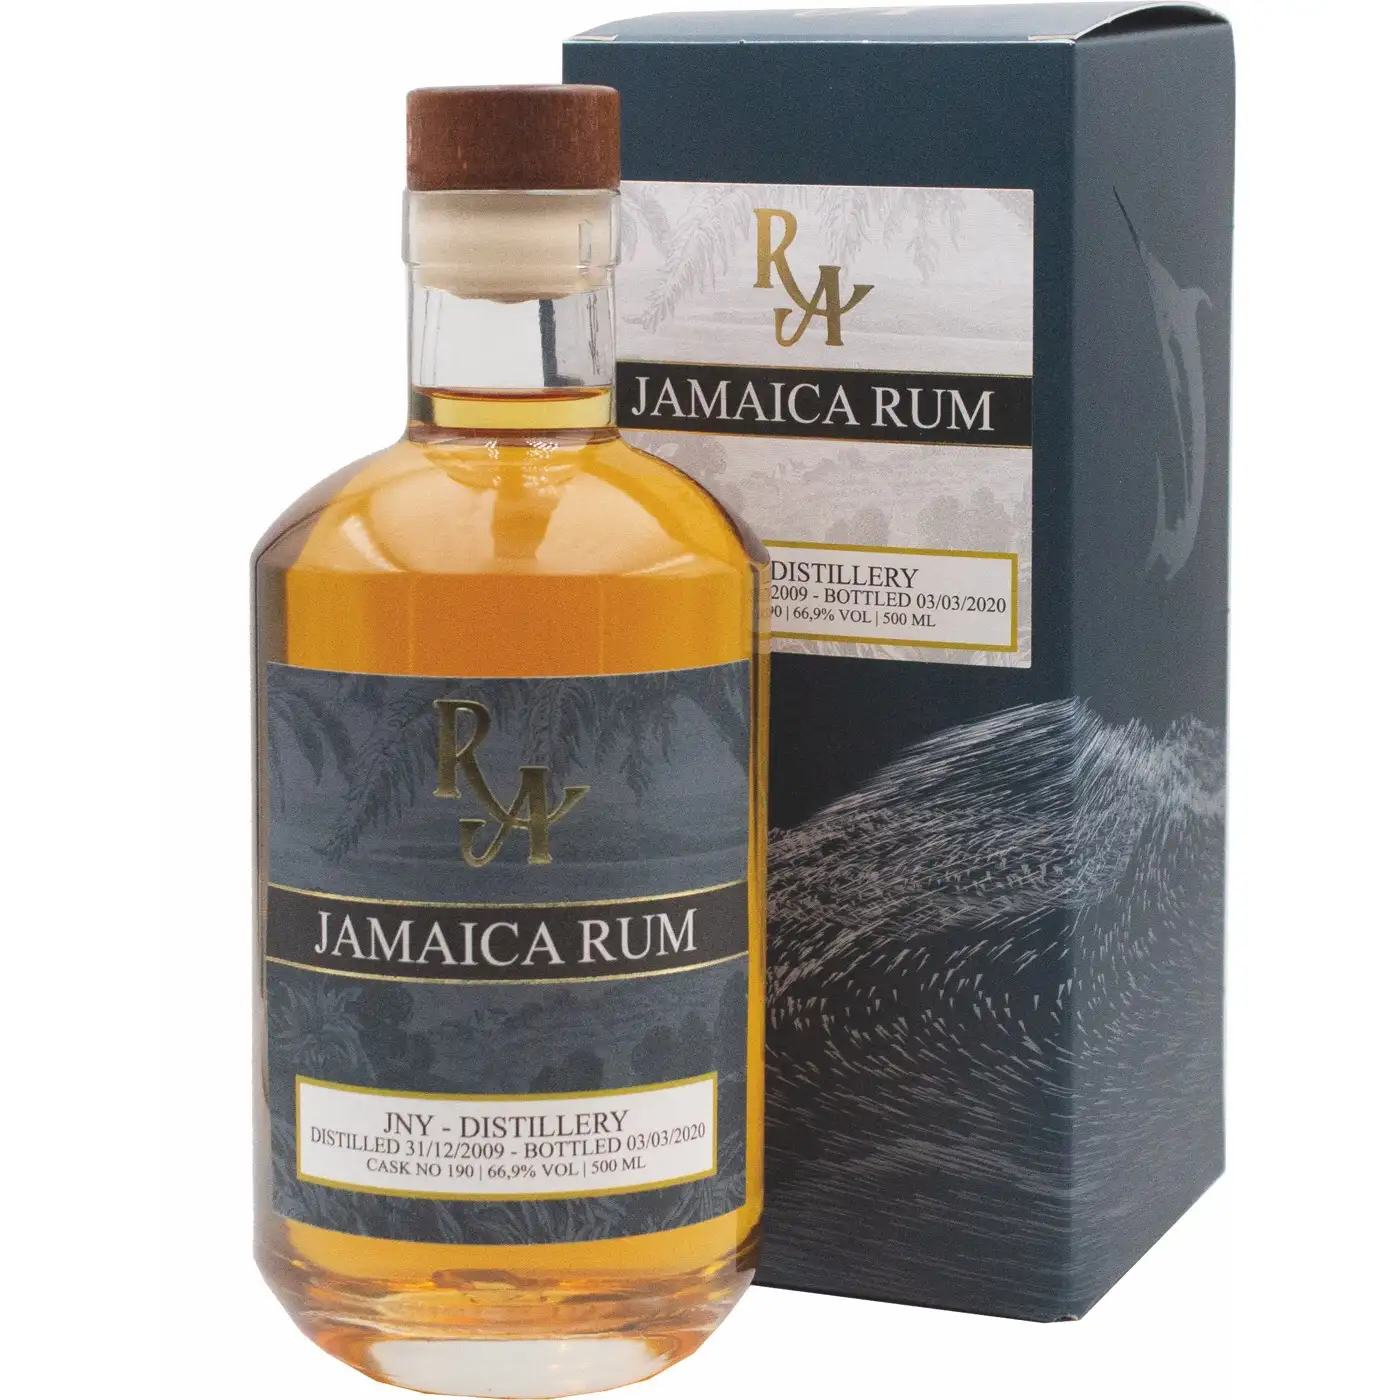 Image of the front of the bottle of the rum Rum Artesanal Jamaica Rum